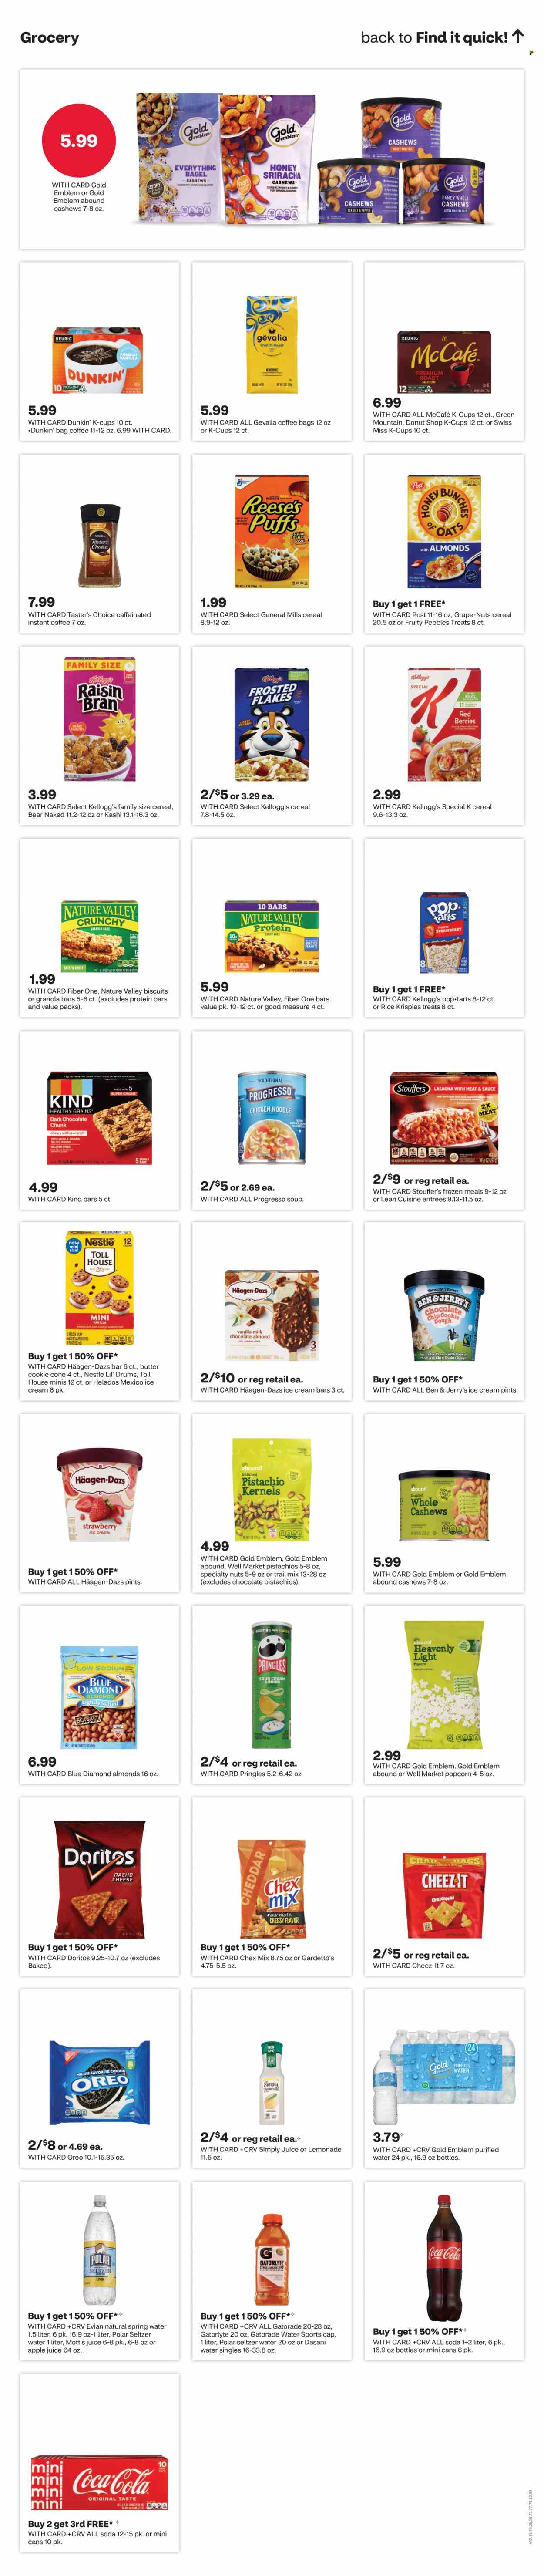 thumbnail - CVS Pharmacy Flyer - 04/28/2024 - 05/04/2024 - Sales products - soup, Progresso, Lean Cuisine, ready meal, Oreo, ice cream, ice cream bars, Häagen-Dazs, Ben & Jerry's, Nestlé, Kellogg's, biscuit, snack bar, Mott's, Swiss Miss, General Mills, breakfast bar, Doritos, Pringles, popcorn, Cheez-It, Chex Mix, salty snack, cereals, corn flakes, protein bar, nut bar, granola bar, Fruity Pebbles, Nature Valley, Fiber One, almonds, cashews, Blue Diamond, trail mix, apple juice, lemonade, juice, Gatorade, electrolyte drink, seltzer water, spring water, soda, bottled water, Evian, water, coffee, coffee capsules, McCafe, K-Cups, Gevalia, Green Mountain. Page 16.